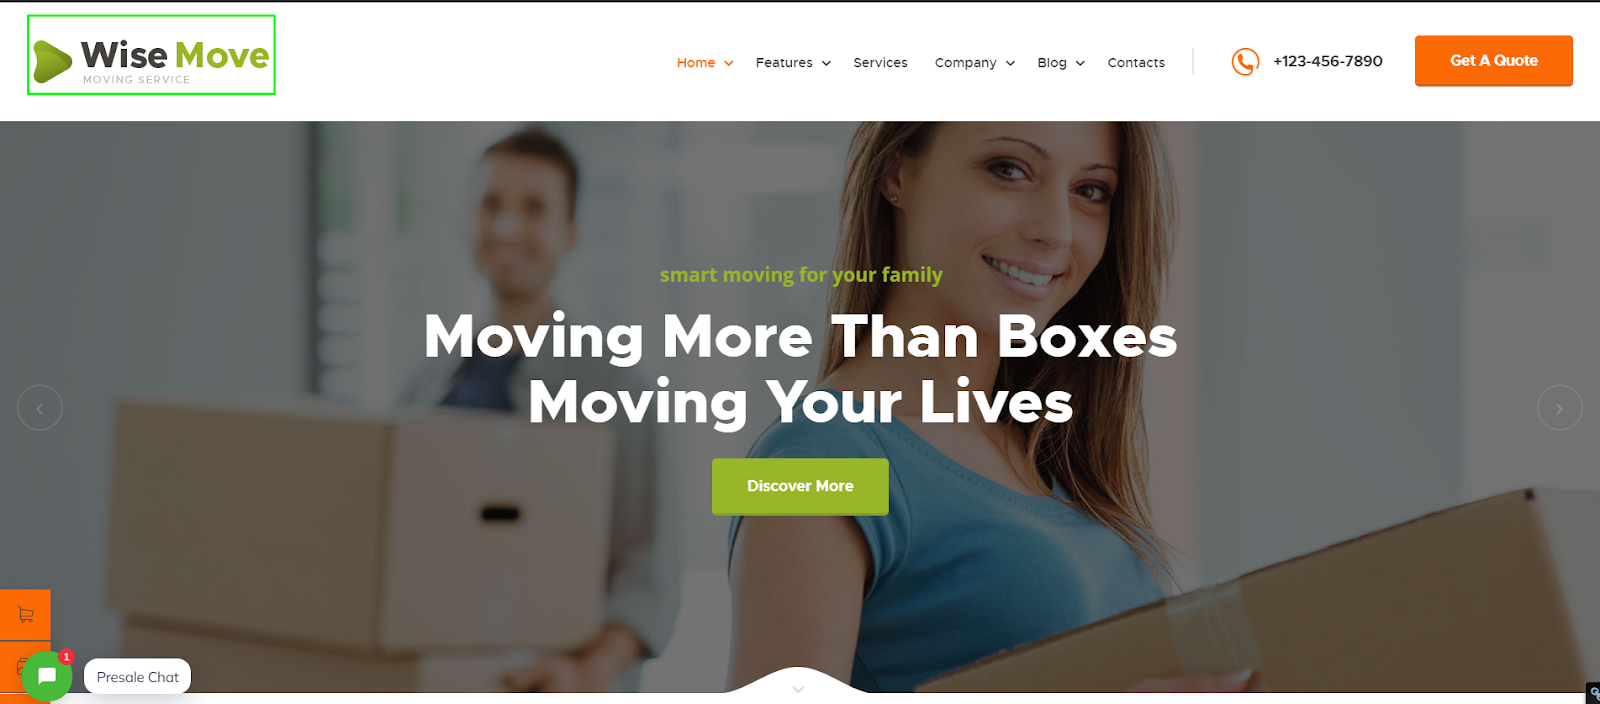 Wise Move - Relocation and Storage Service WordPress Theme 